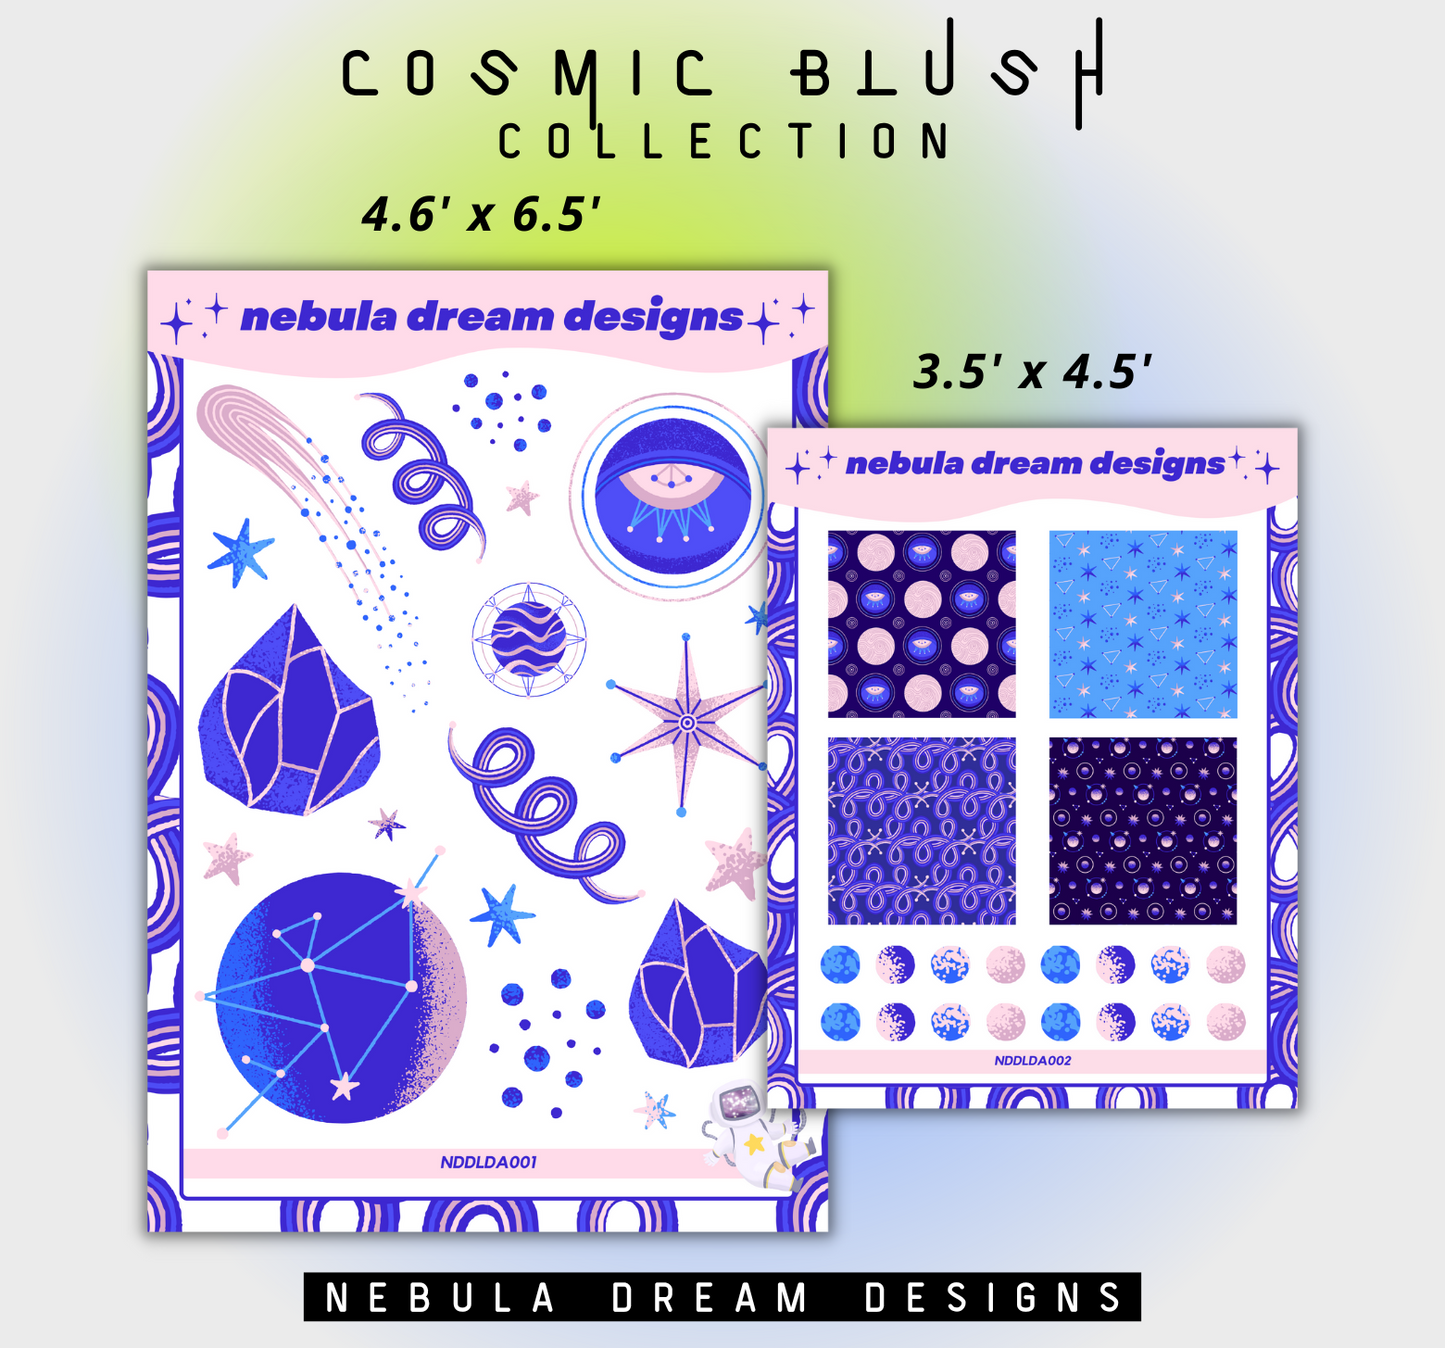 Deco Collection - "Cosmic Blush"